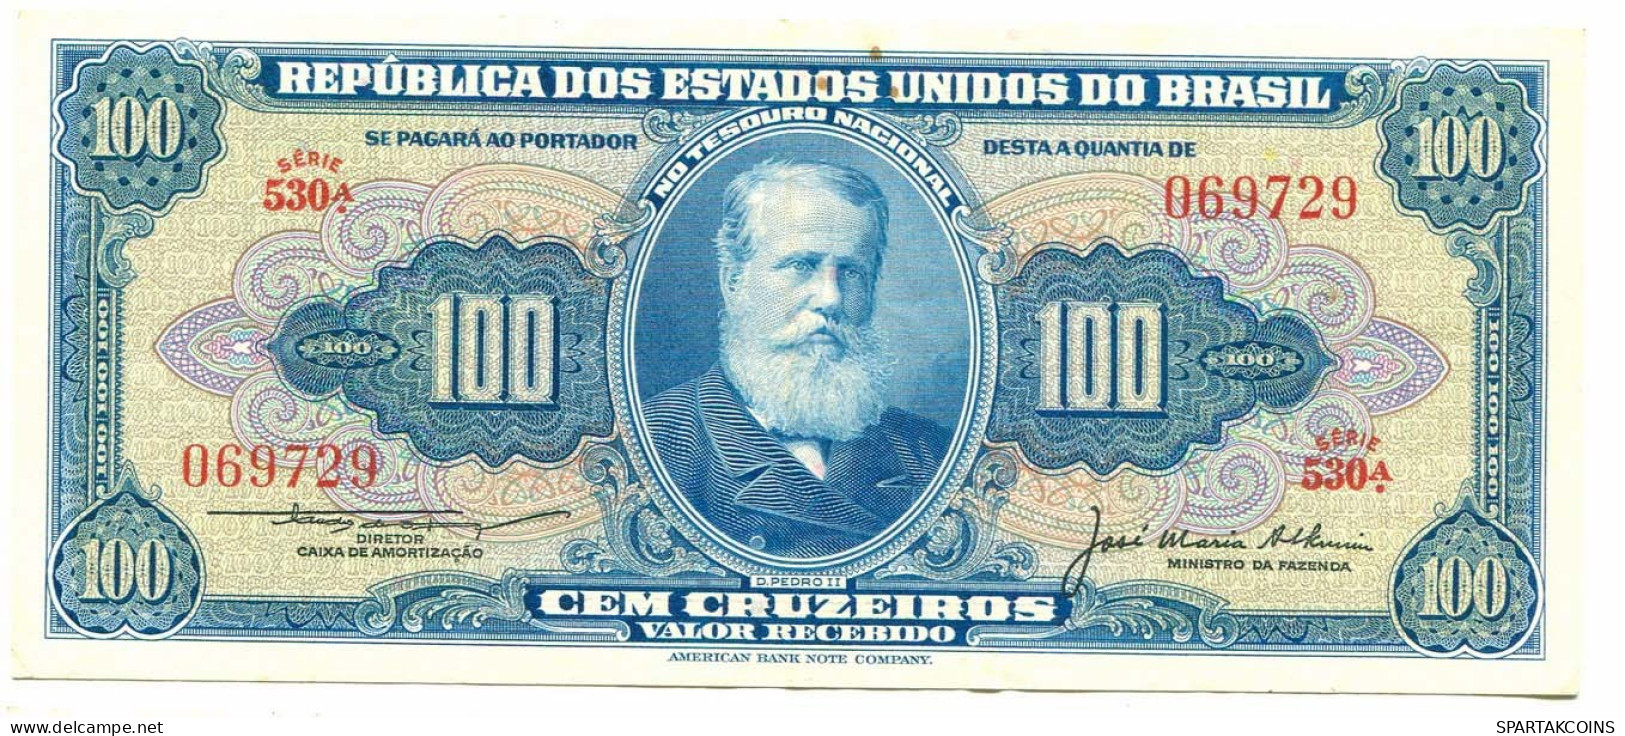 BRASIL 100 CRUZEIROS 1961 SERIE 1343A Paper Money Banknote #P10849.4 - [11] Local Banknote Issues